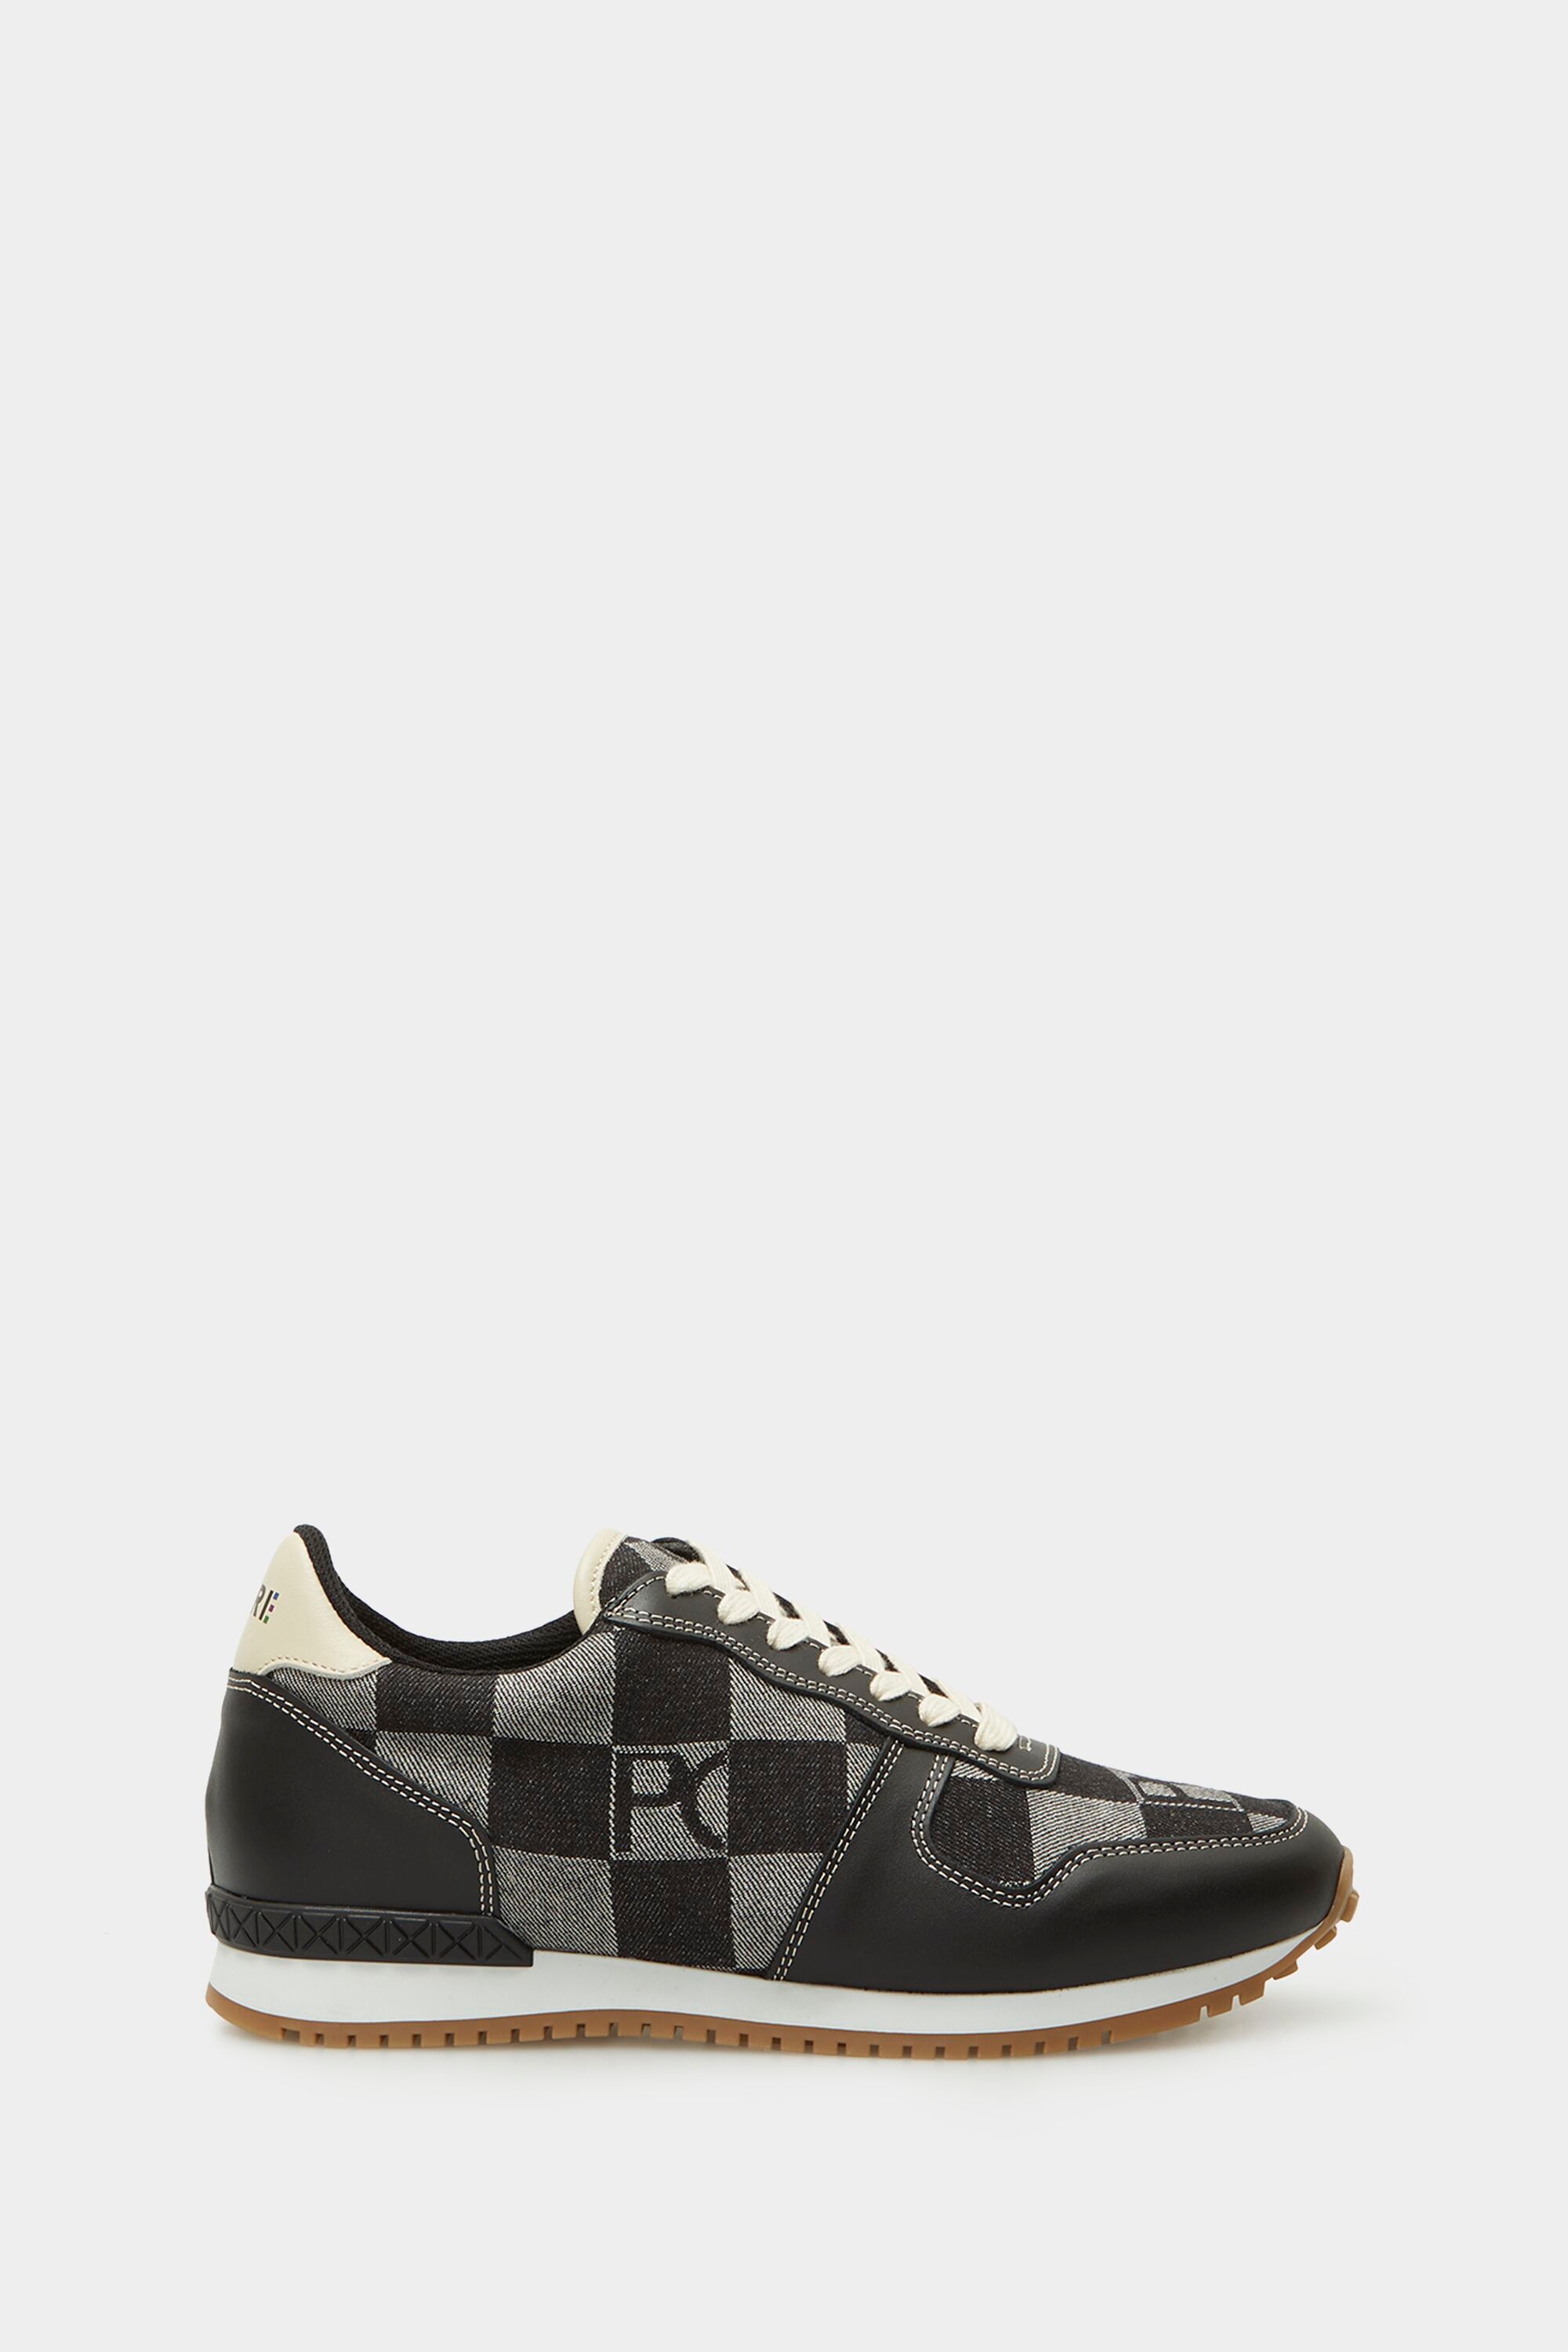 Canvas Cube Denim and leather sneakers